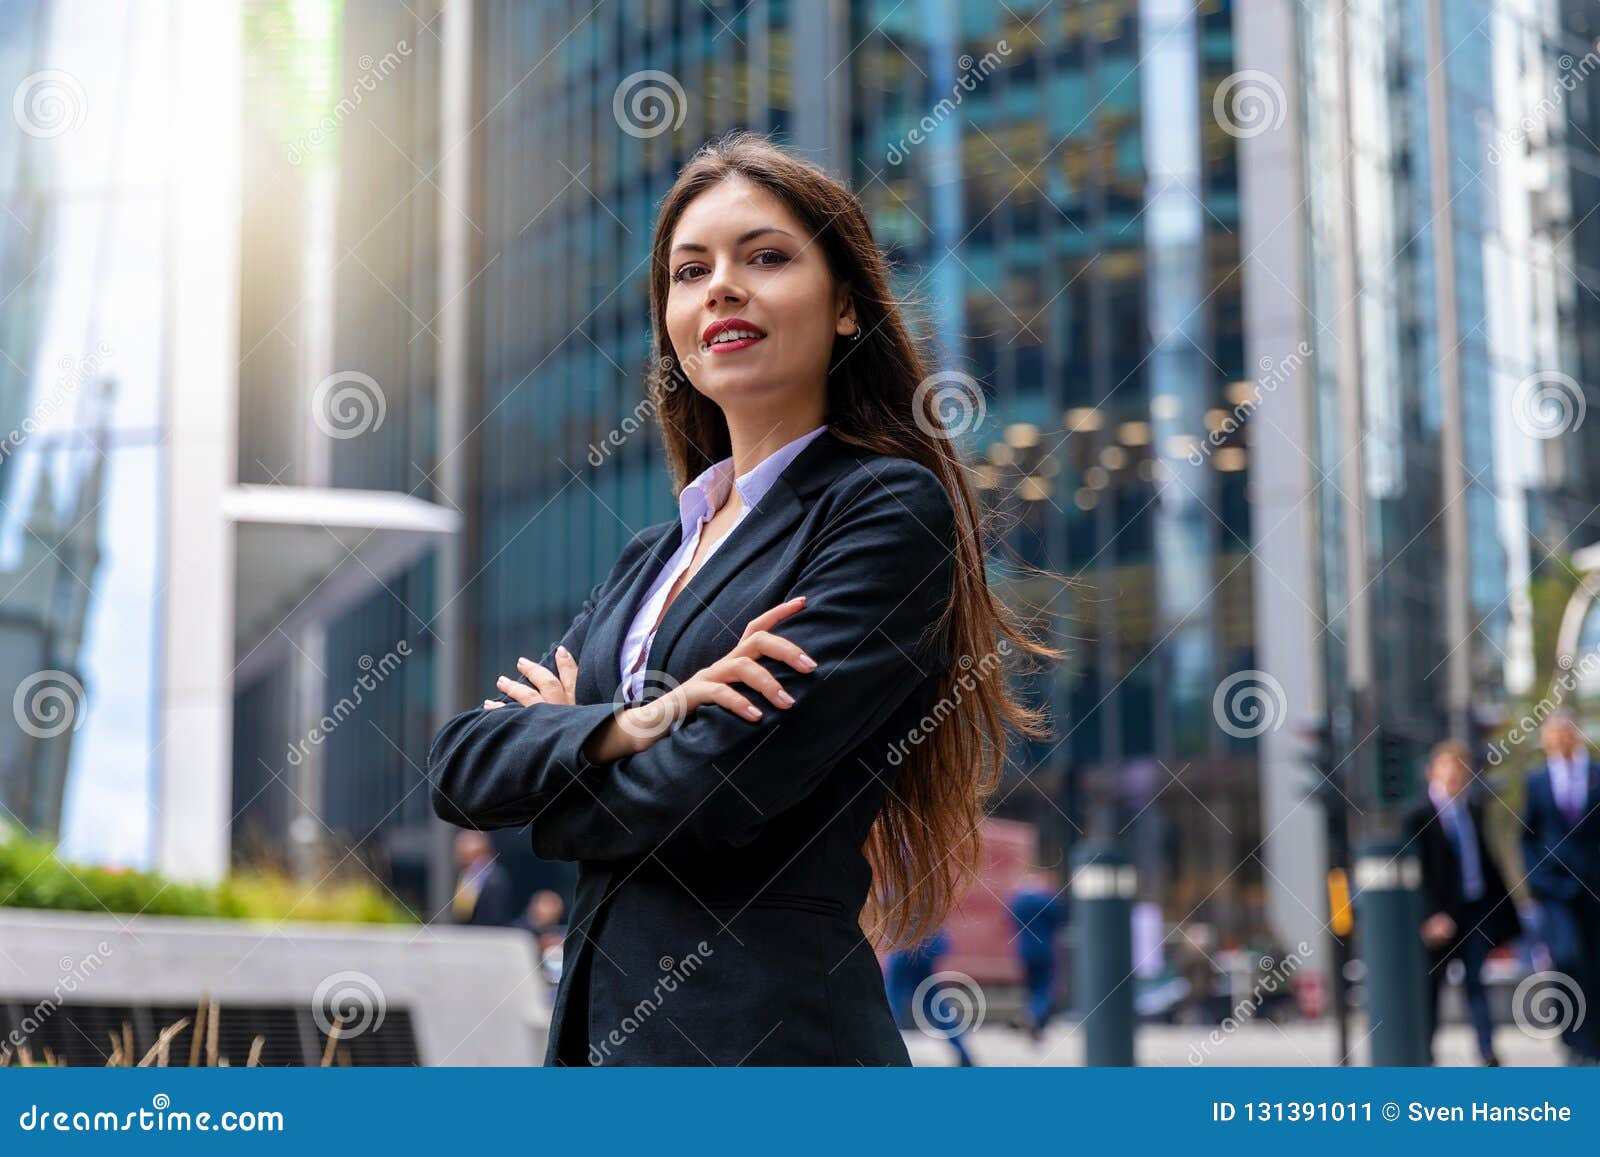 confident business woman portrait in the city of london